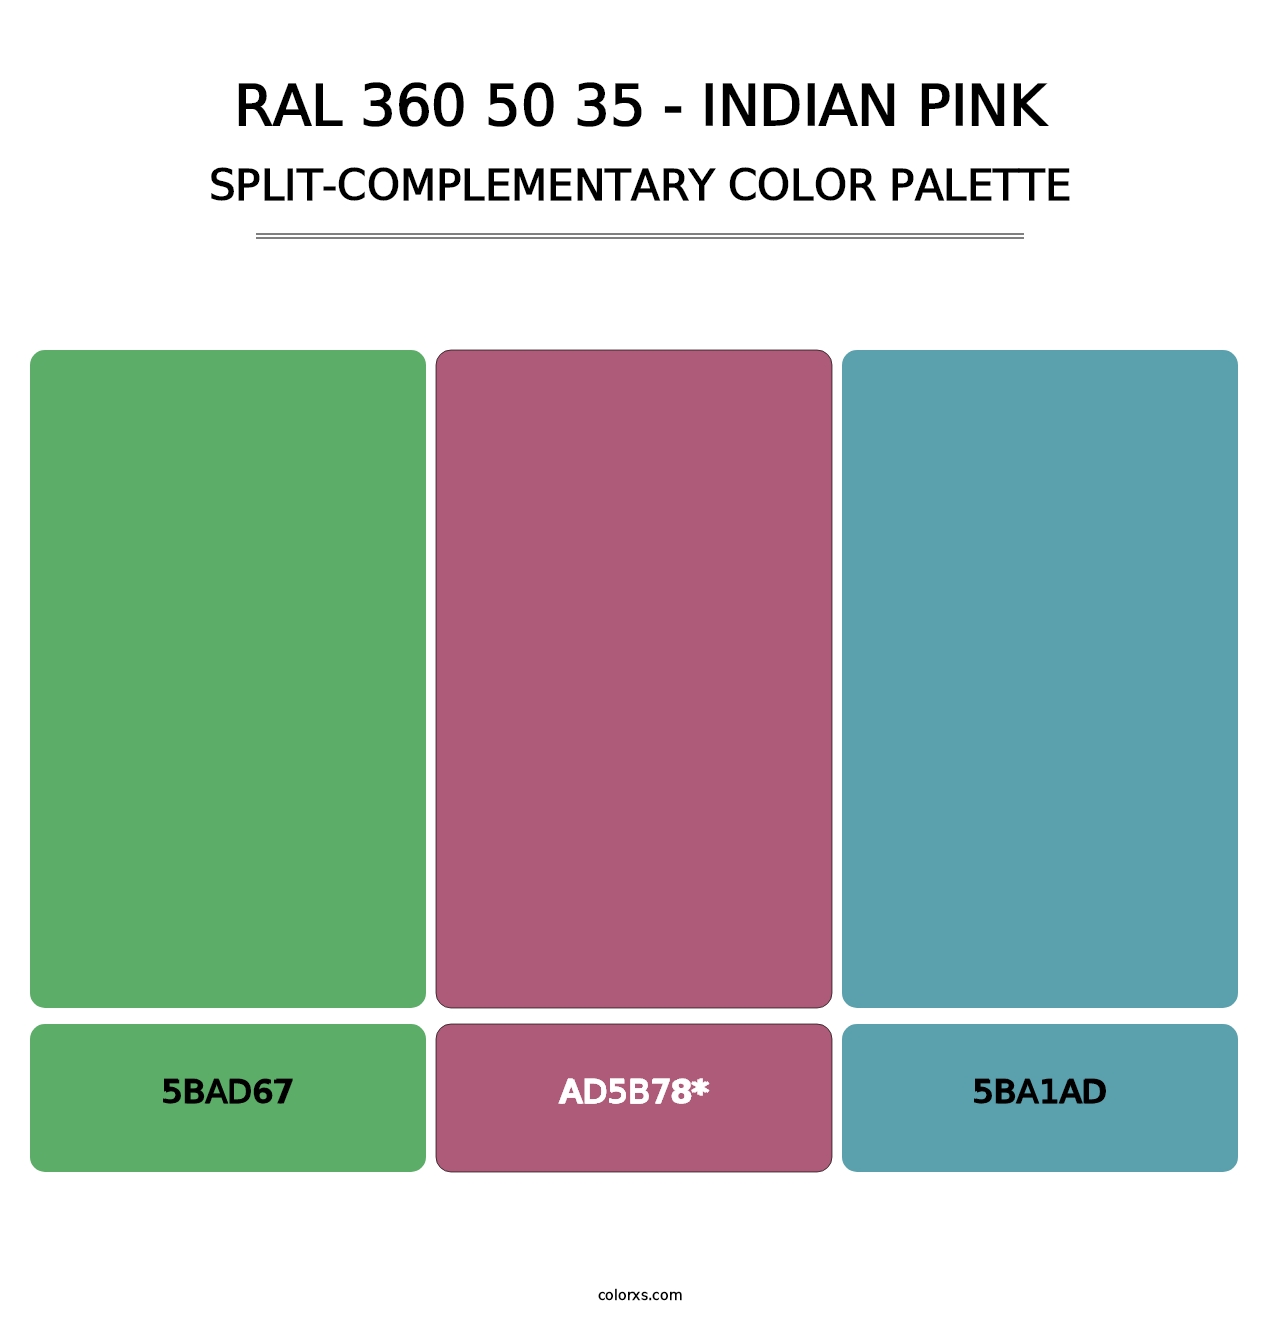 RAL 360 50 35 - Indian Pink - Split-Complementary Color Palette